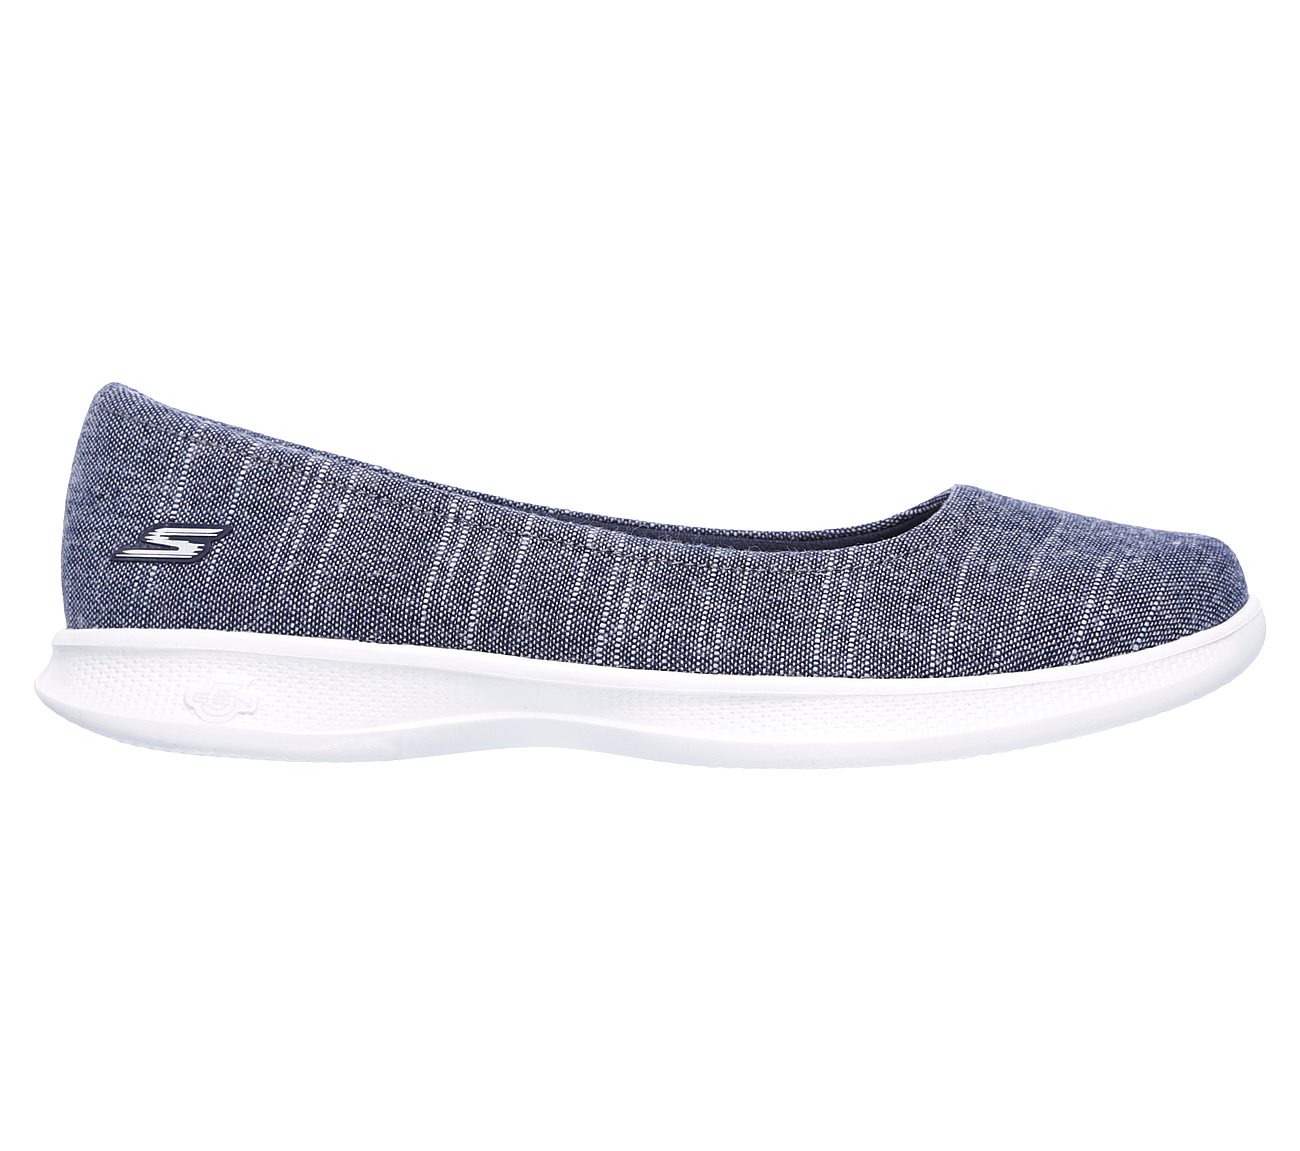 skechers go step lite navy Sale,up to 